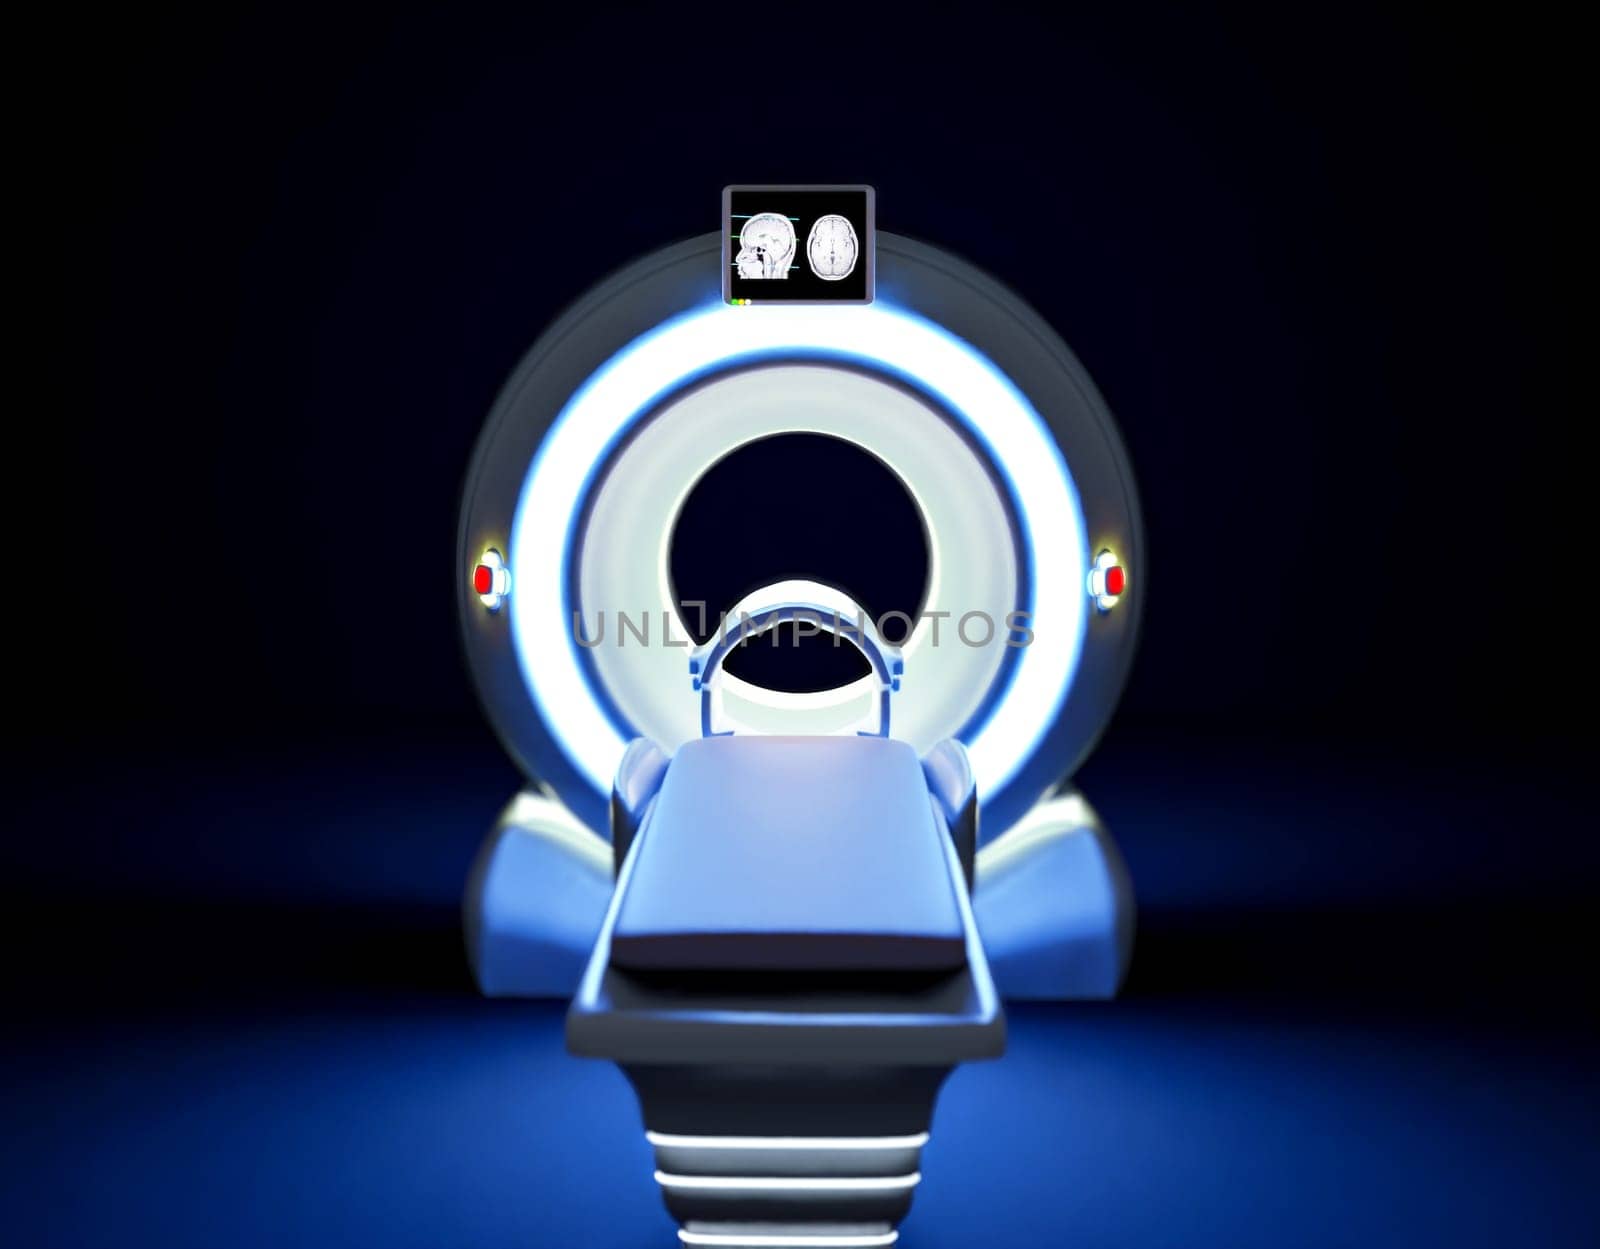 Fronr view of MRI SCANNER - Magnetic resonance imaging  device in Hospital 3D rendering  . Medical Equipment and Health Care background.